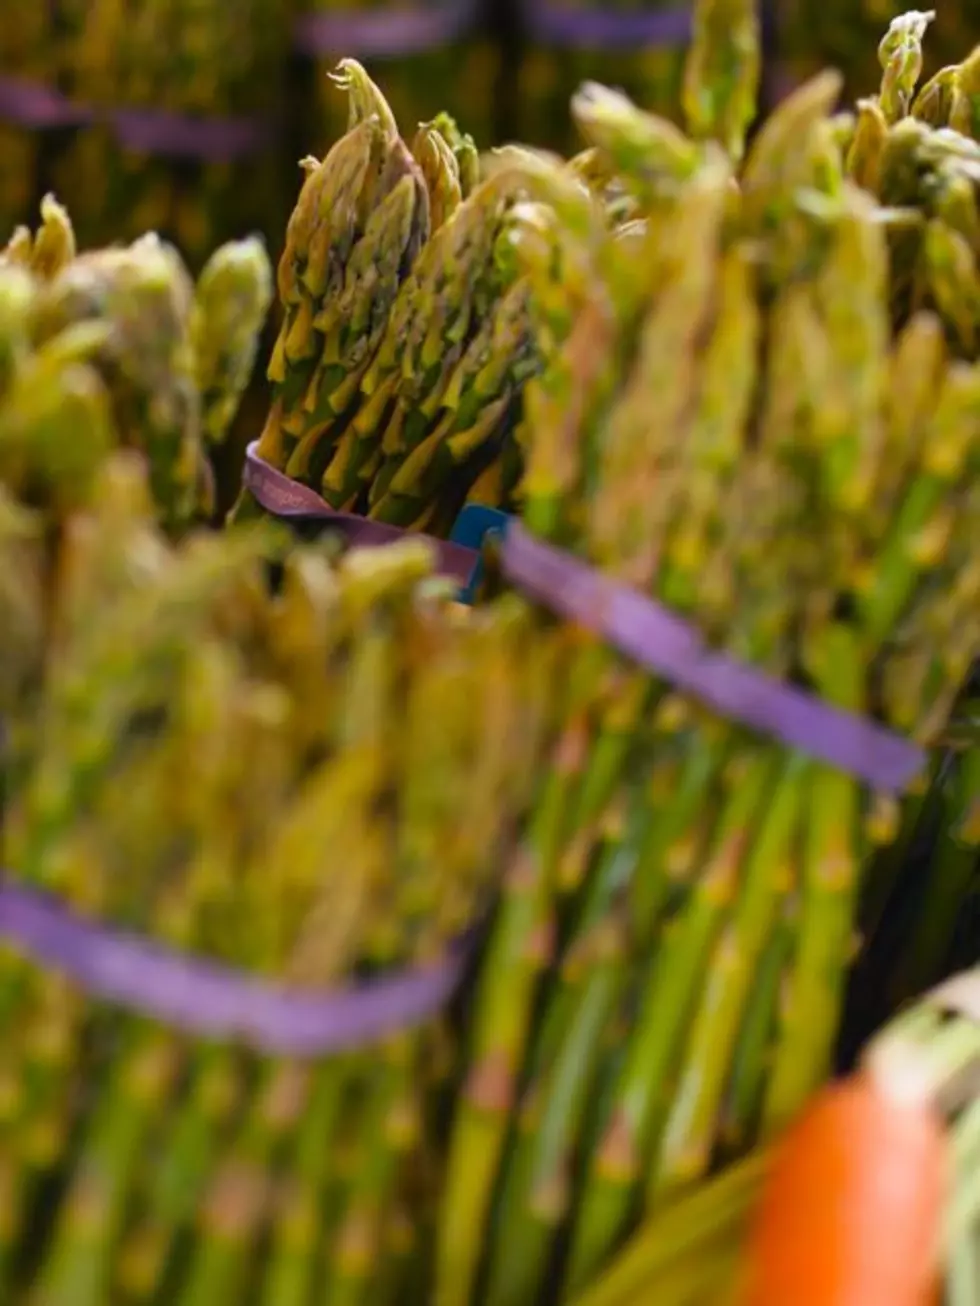 There’s Still Time to Celebrate: May is National Asparagus Month